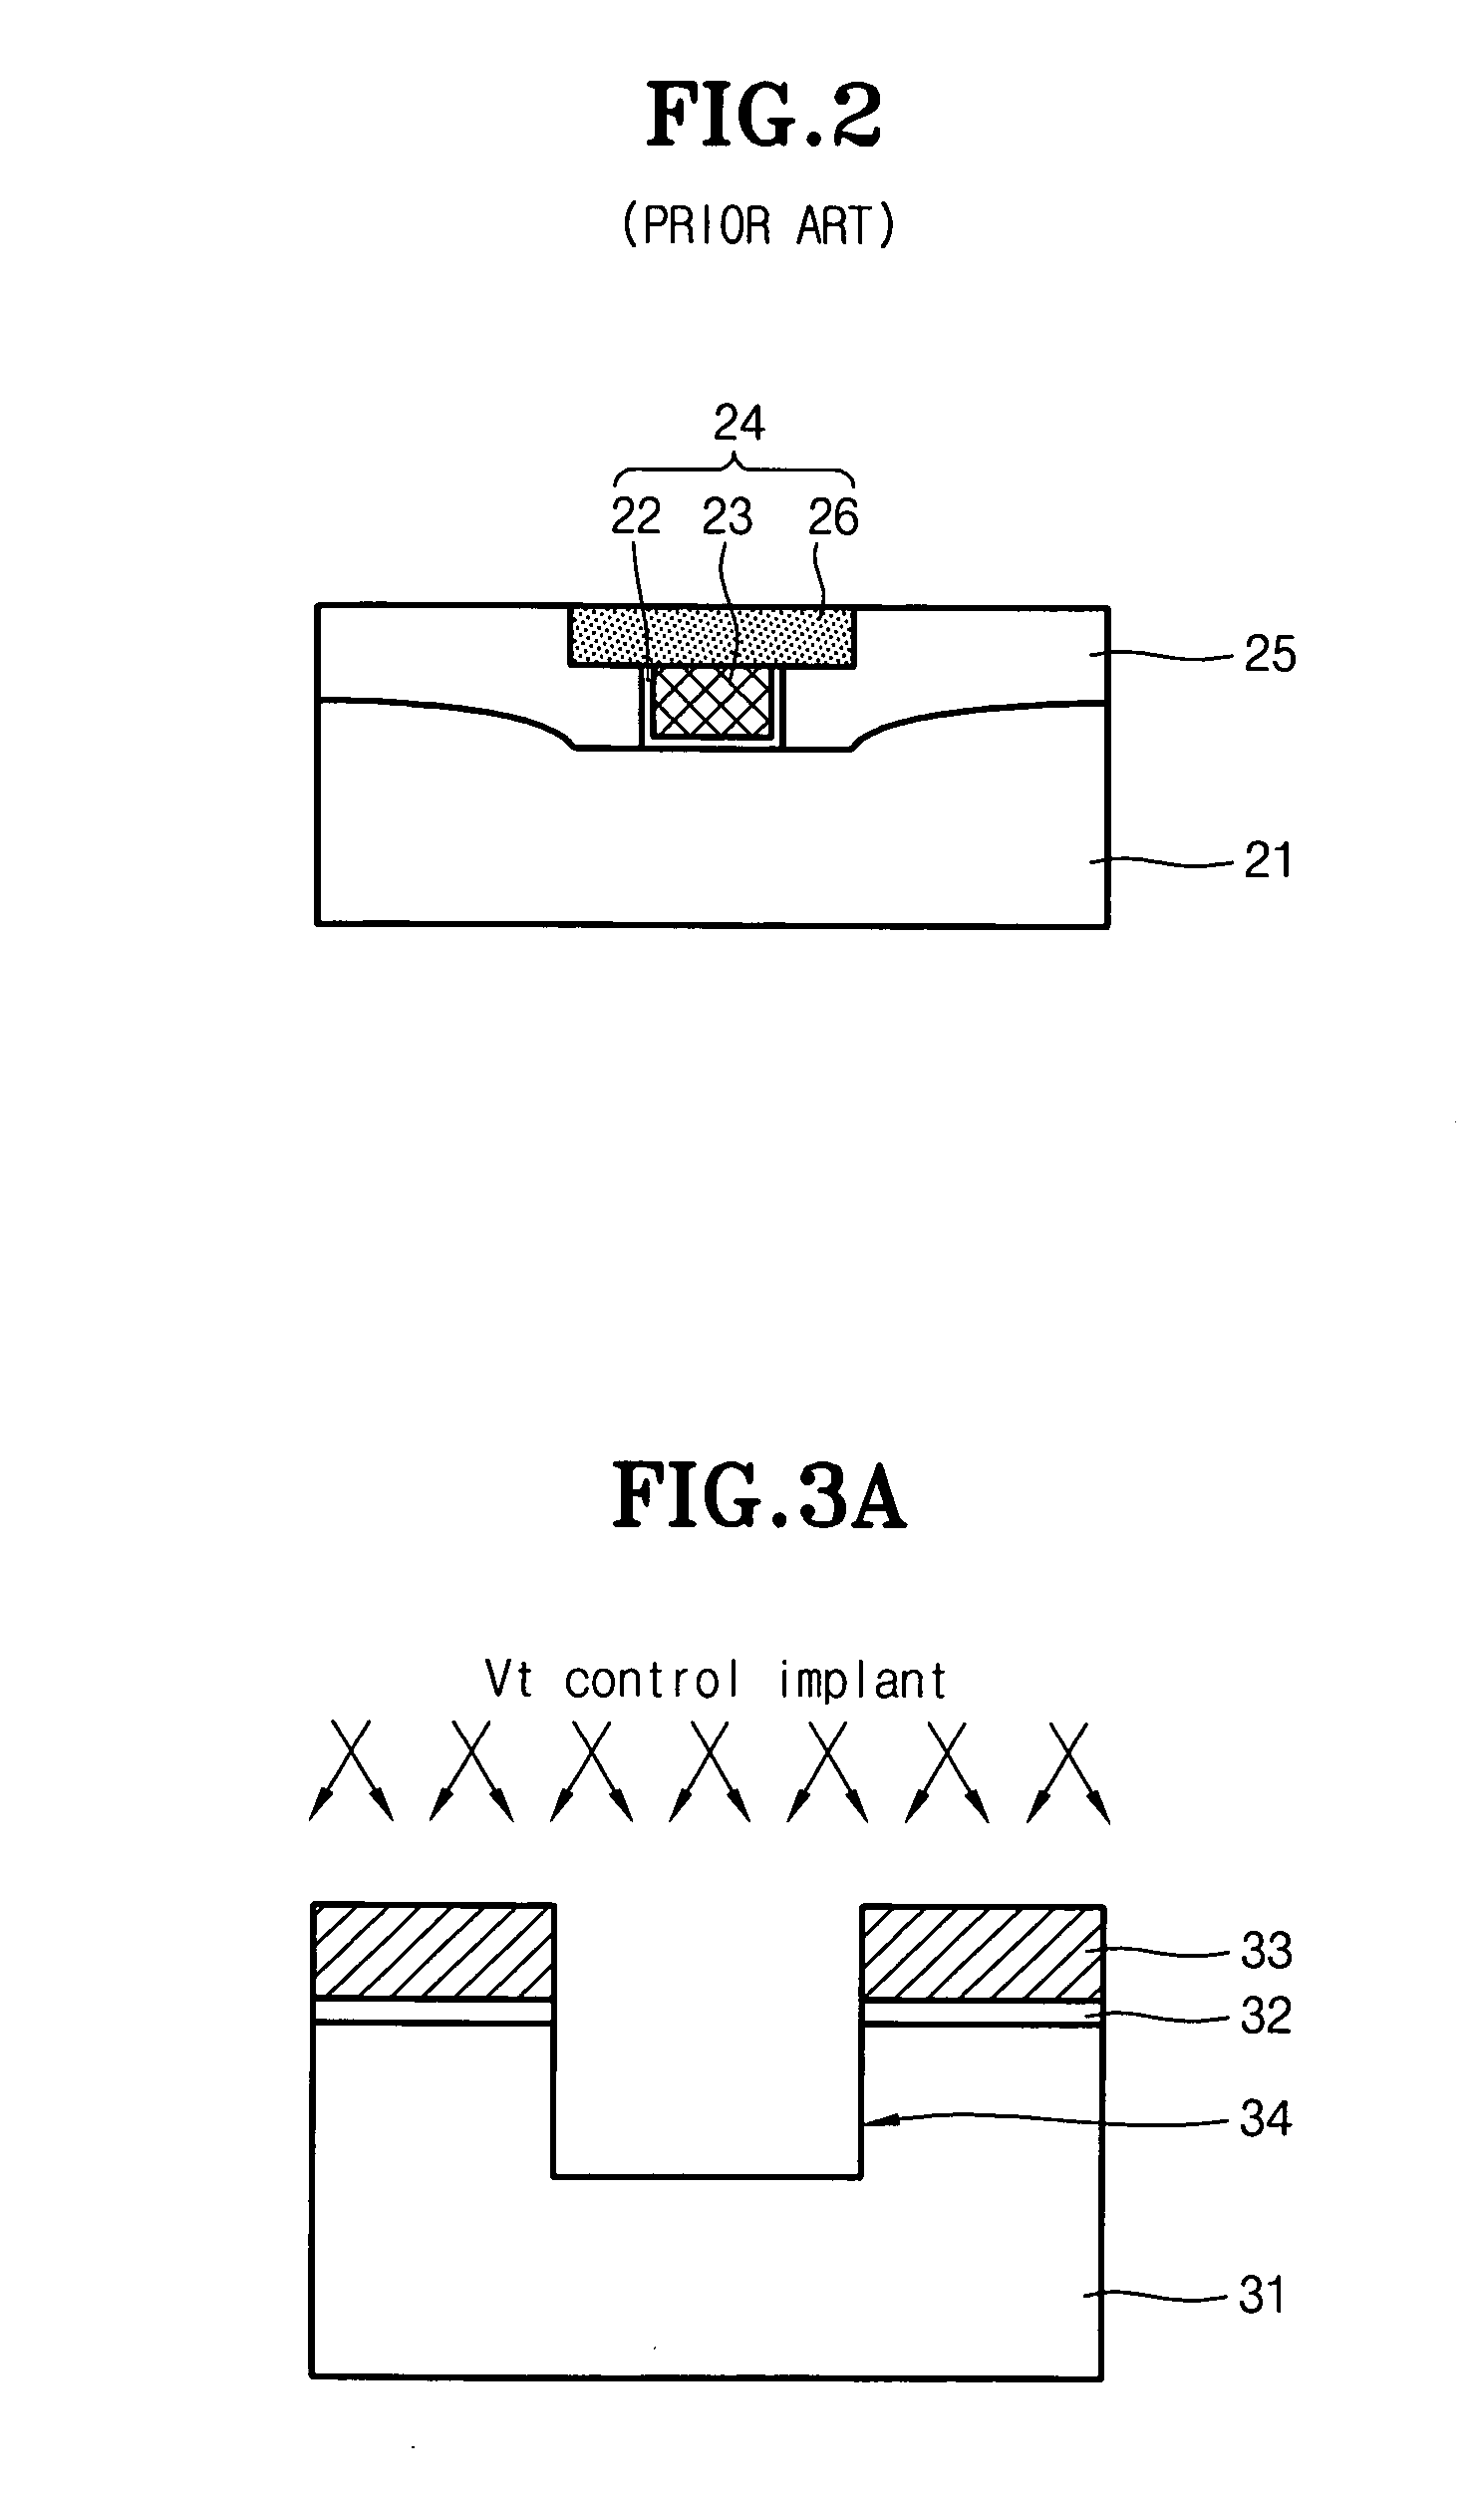 Semiconductor device having a recess gate for improved reliability